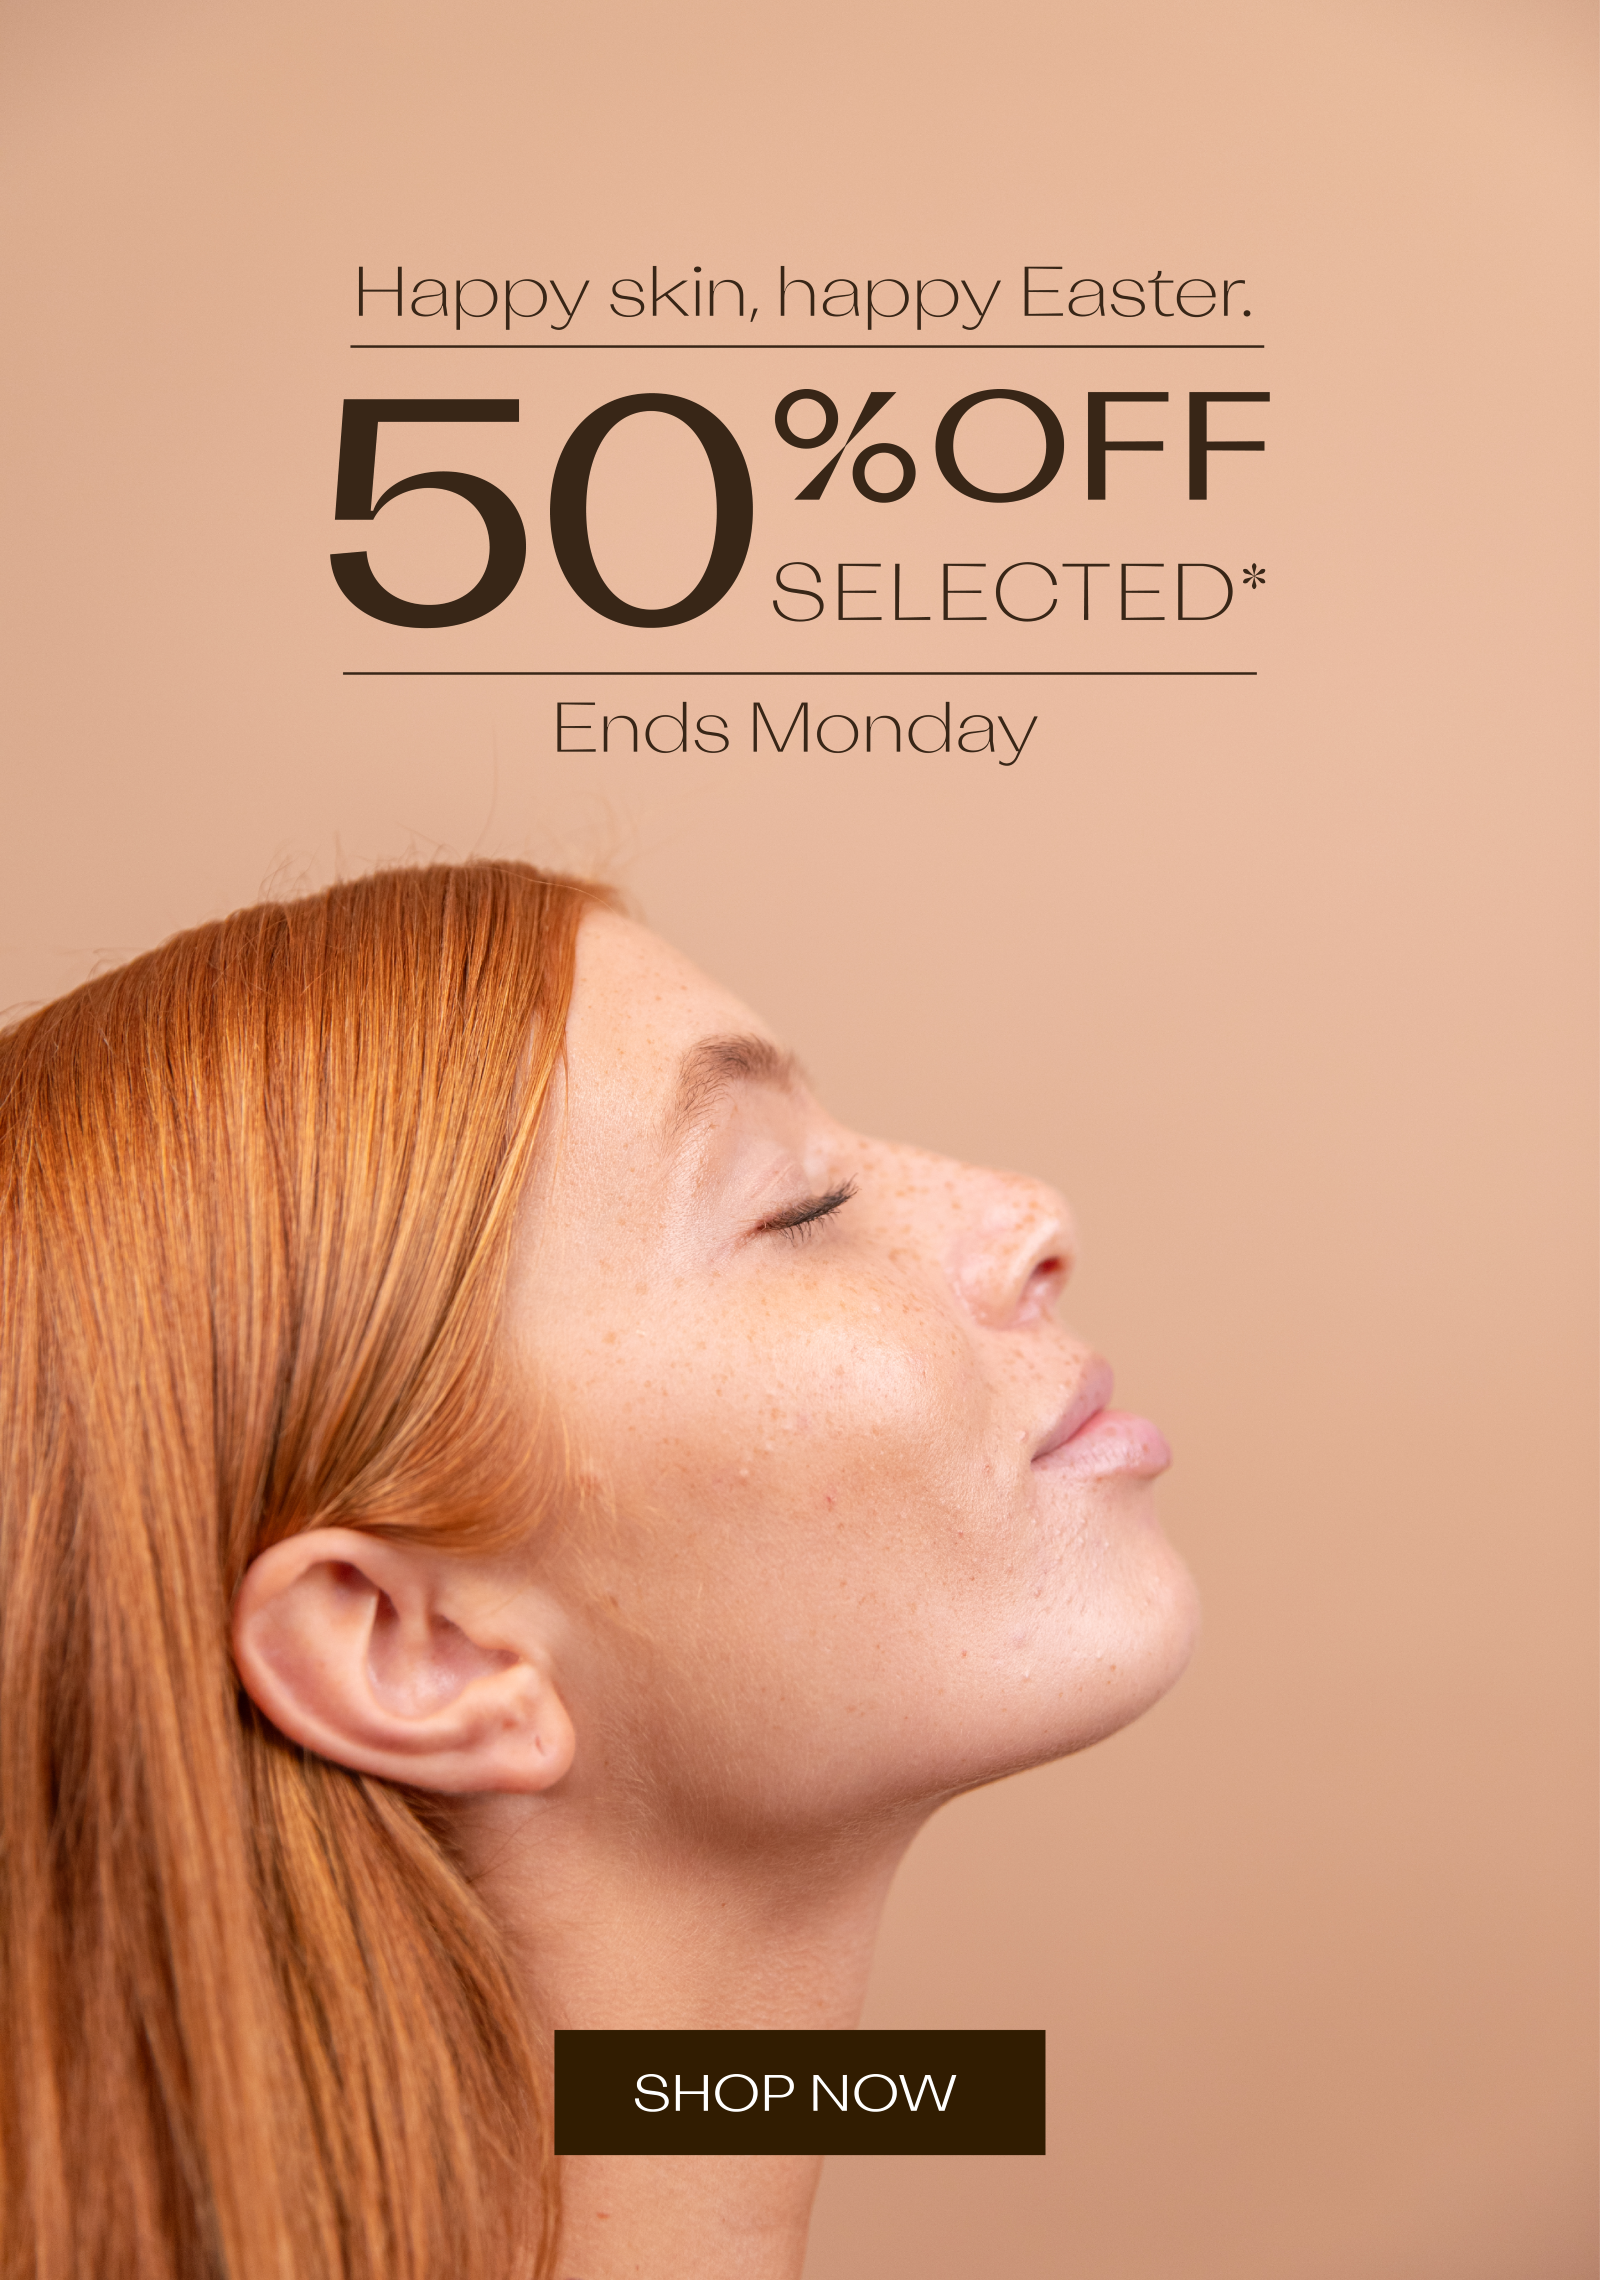 50% off selected*